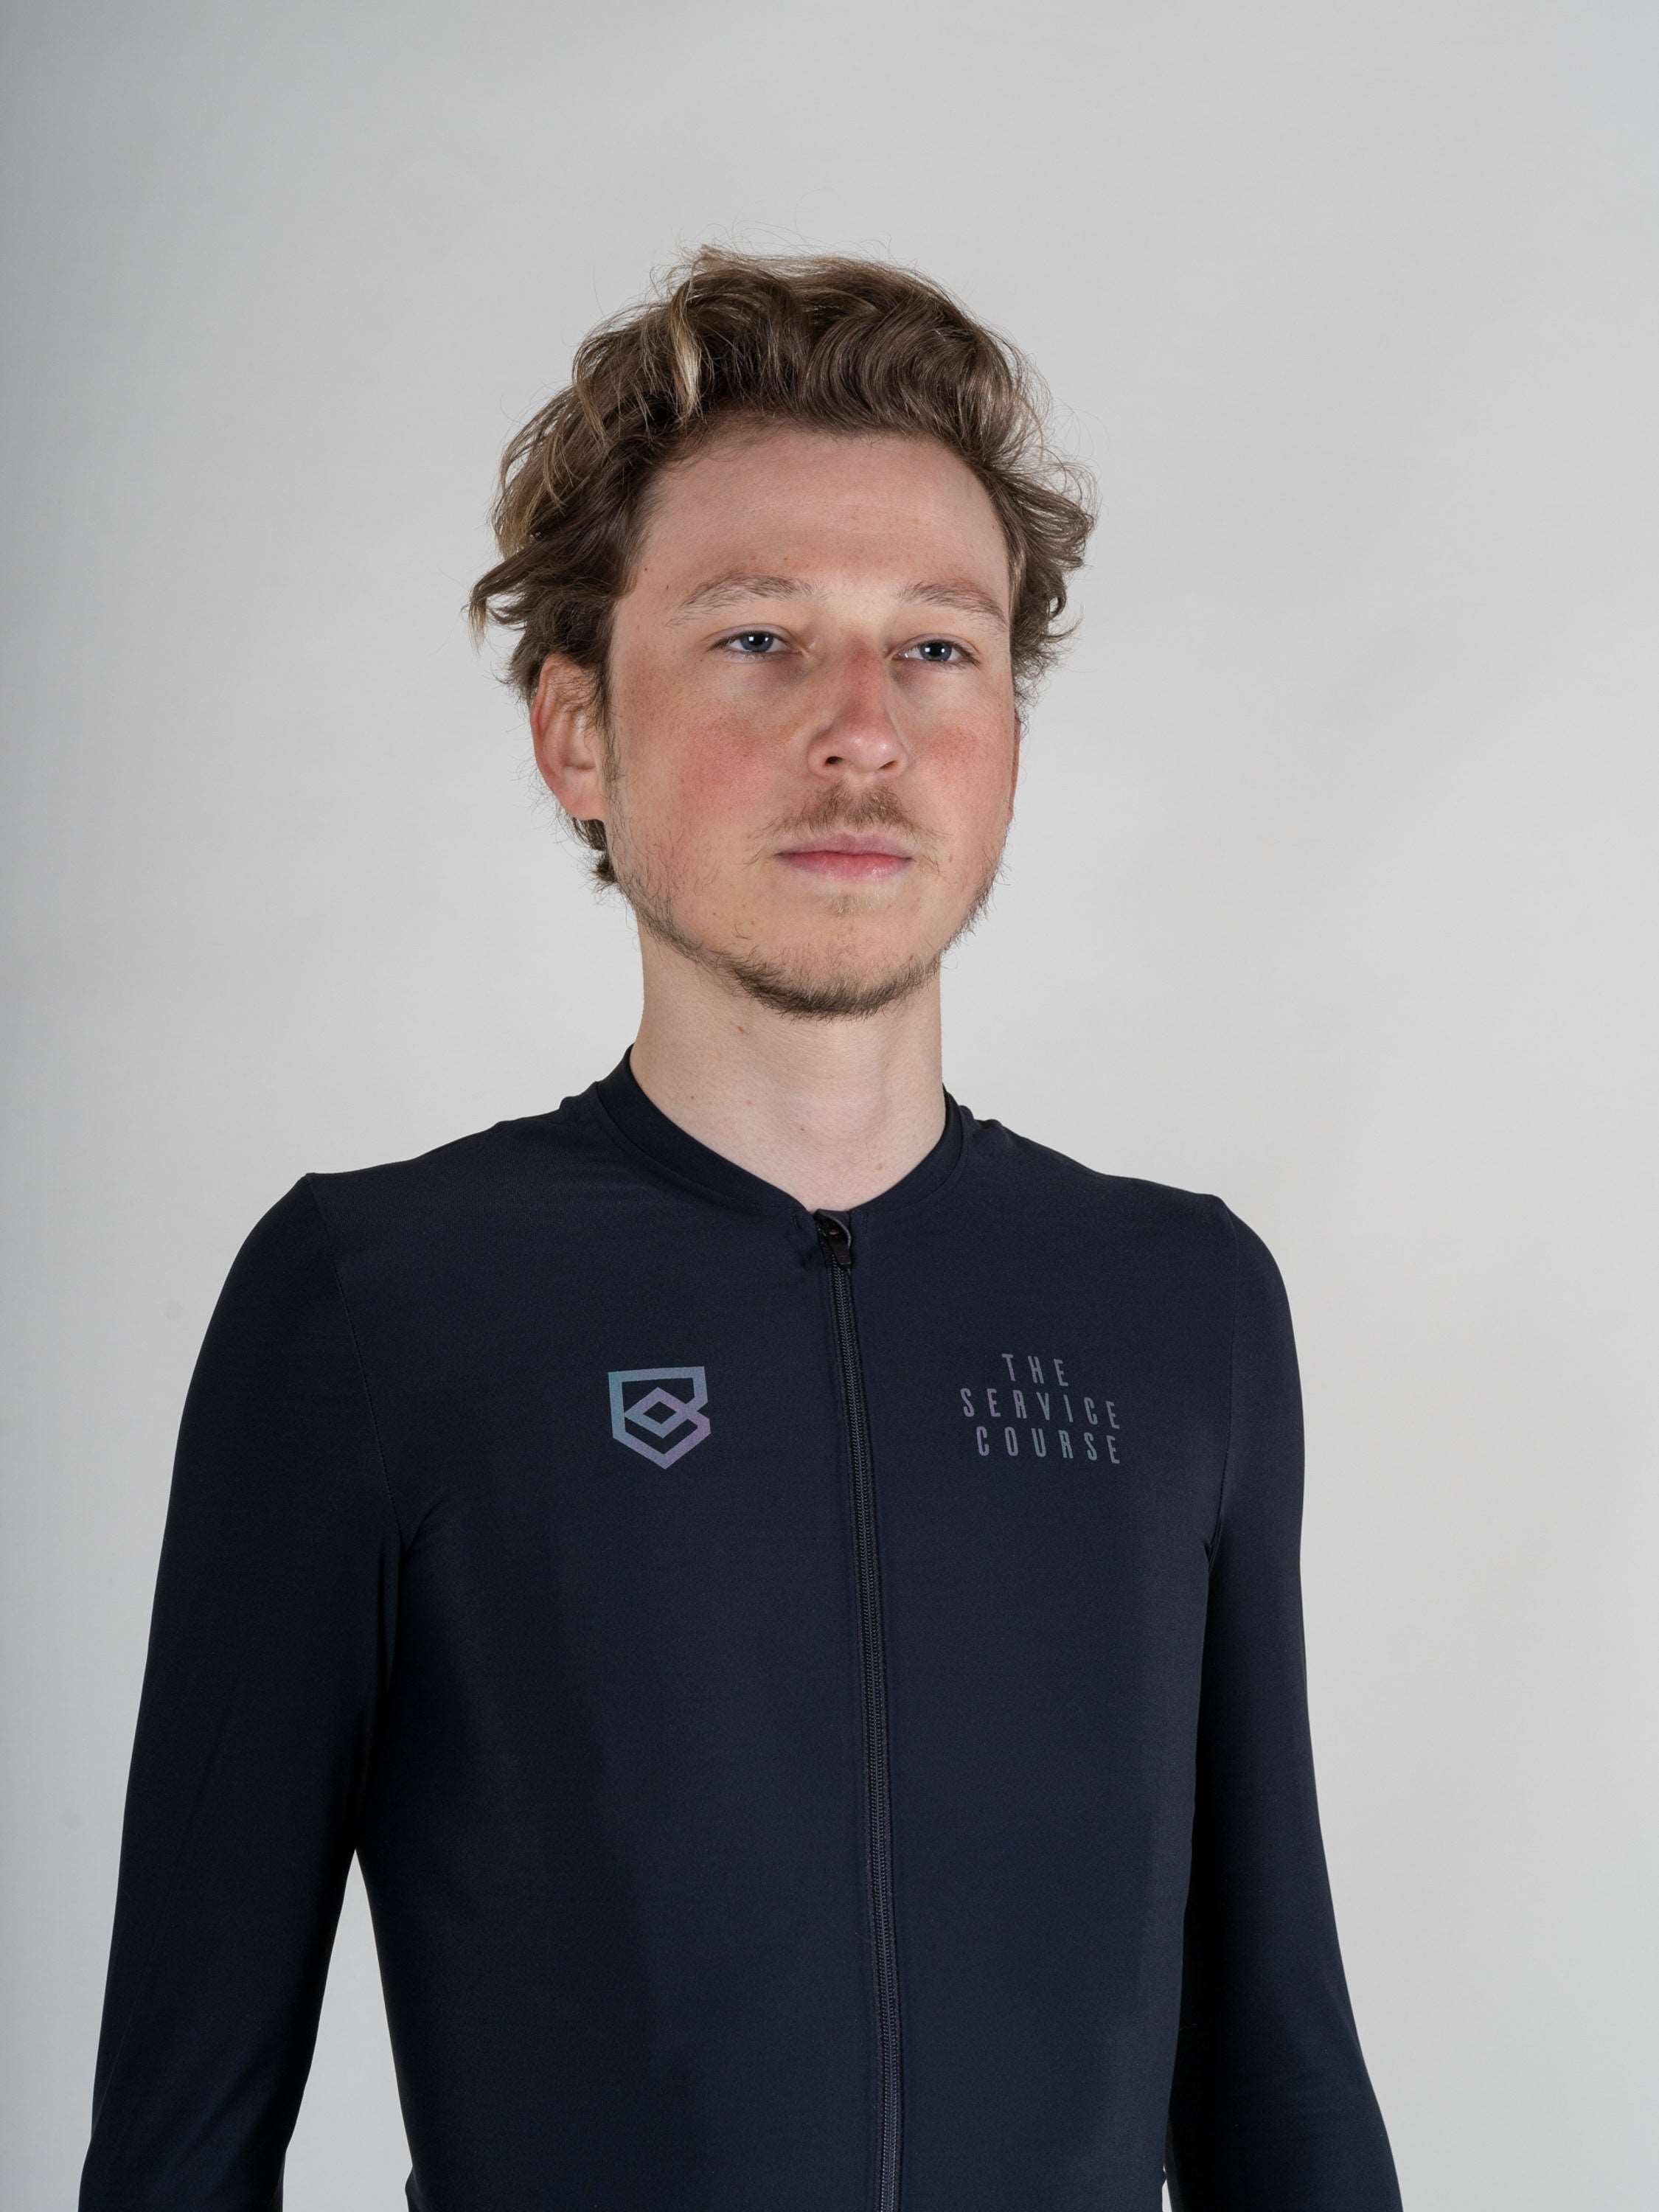 Bastion Cycles - Long Sleeve Training Jersey - Men’s